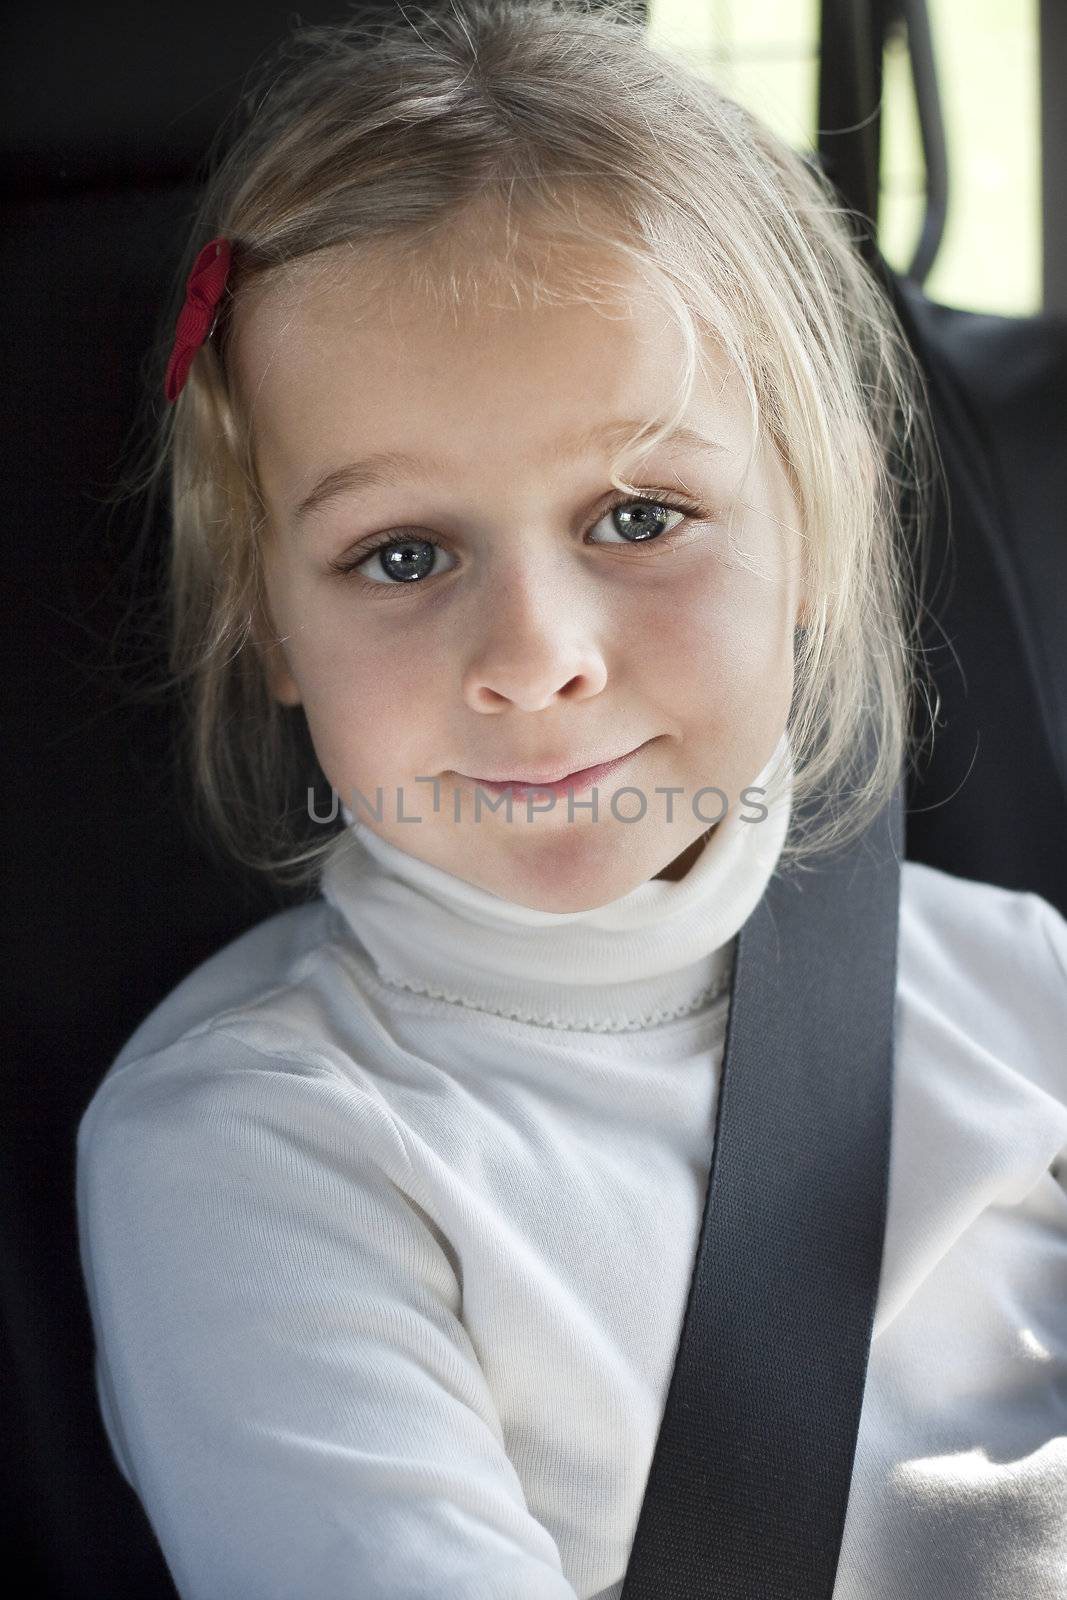 Child in car with seatbelt by annems